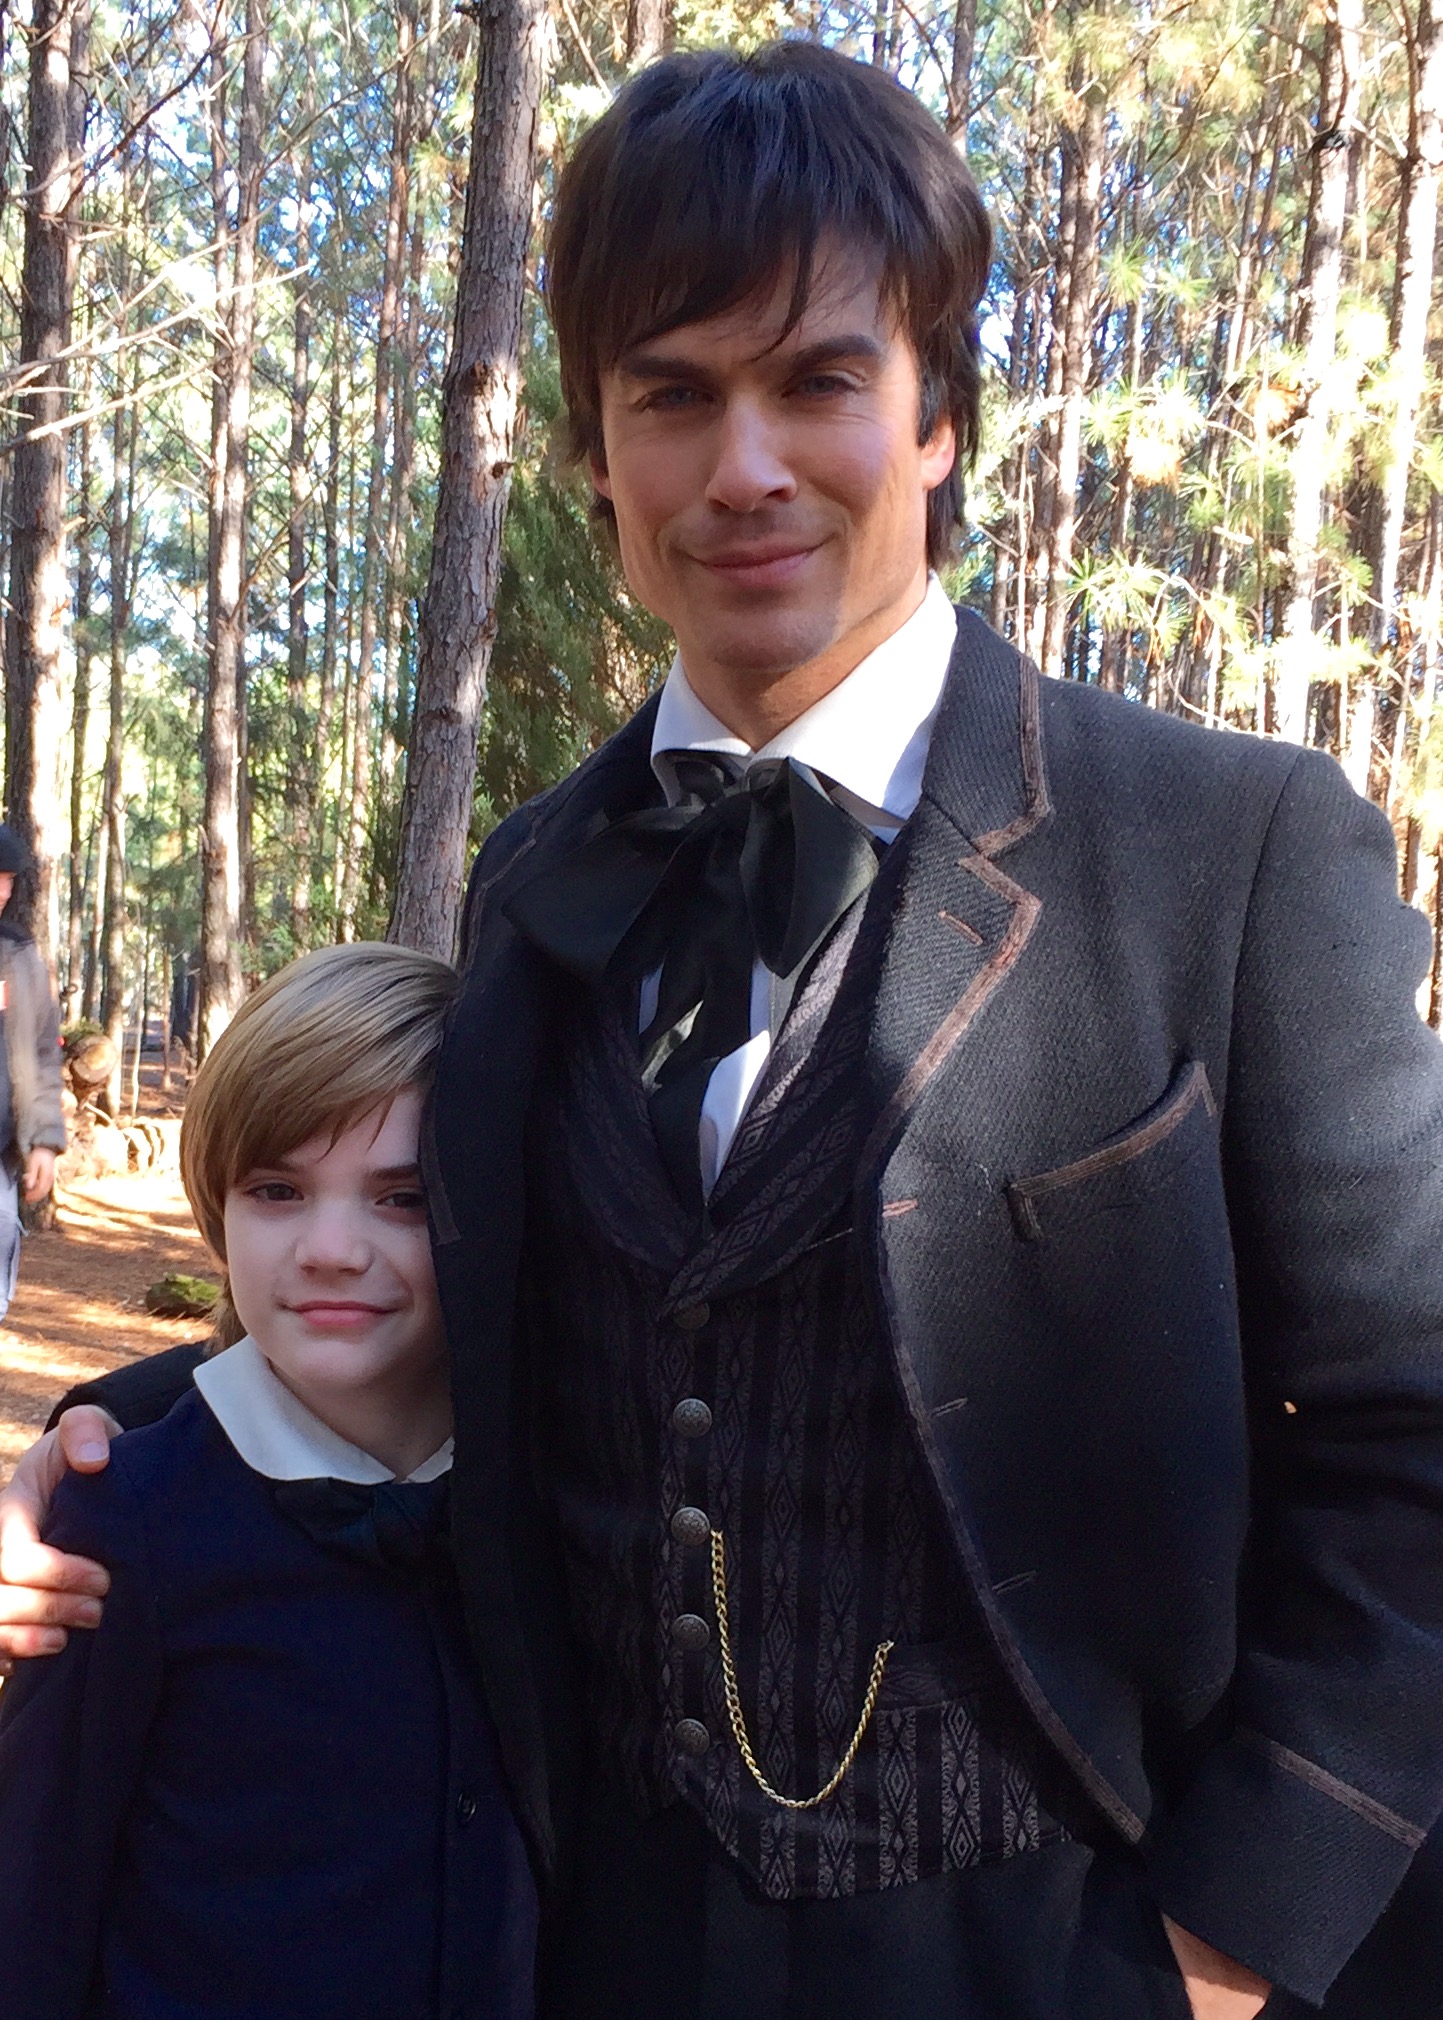 Sawyer Bell and Ian Somerhalder on the set of The Vampire Diaries